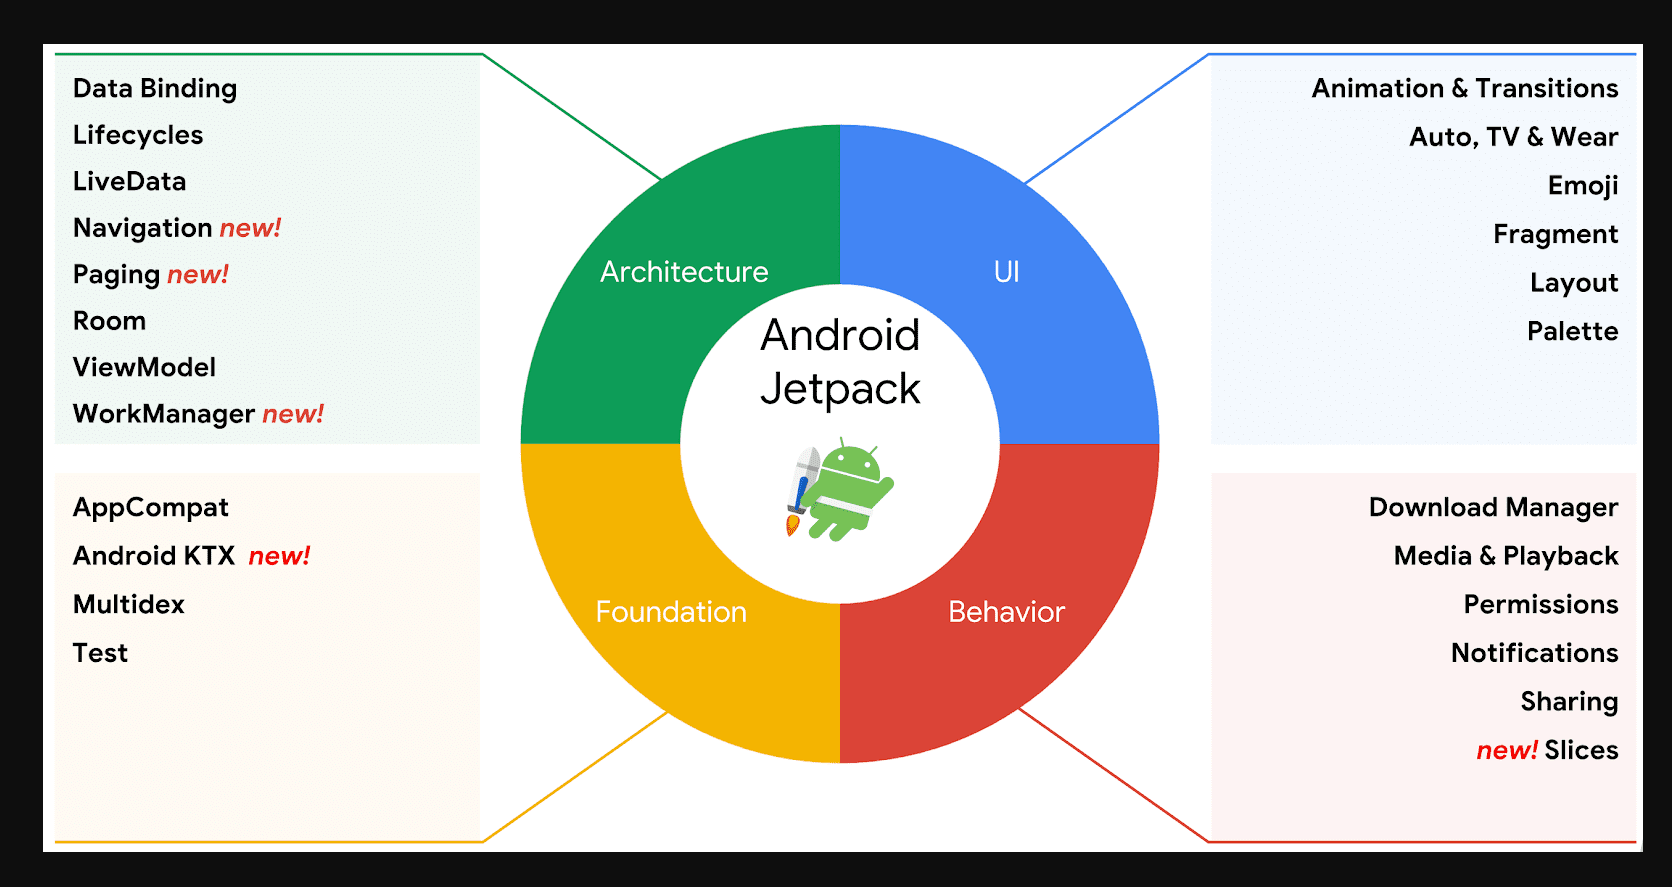 What is Android Jetpack and why should we use it?